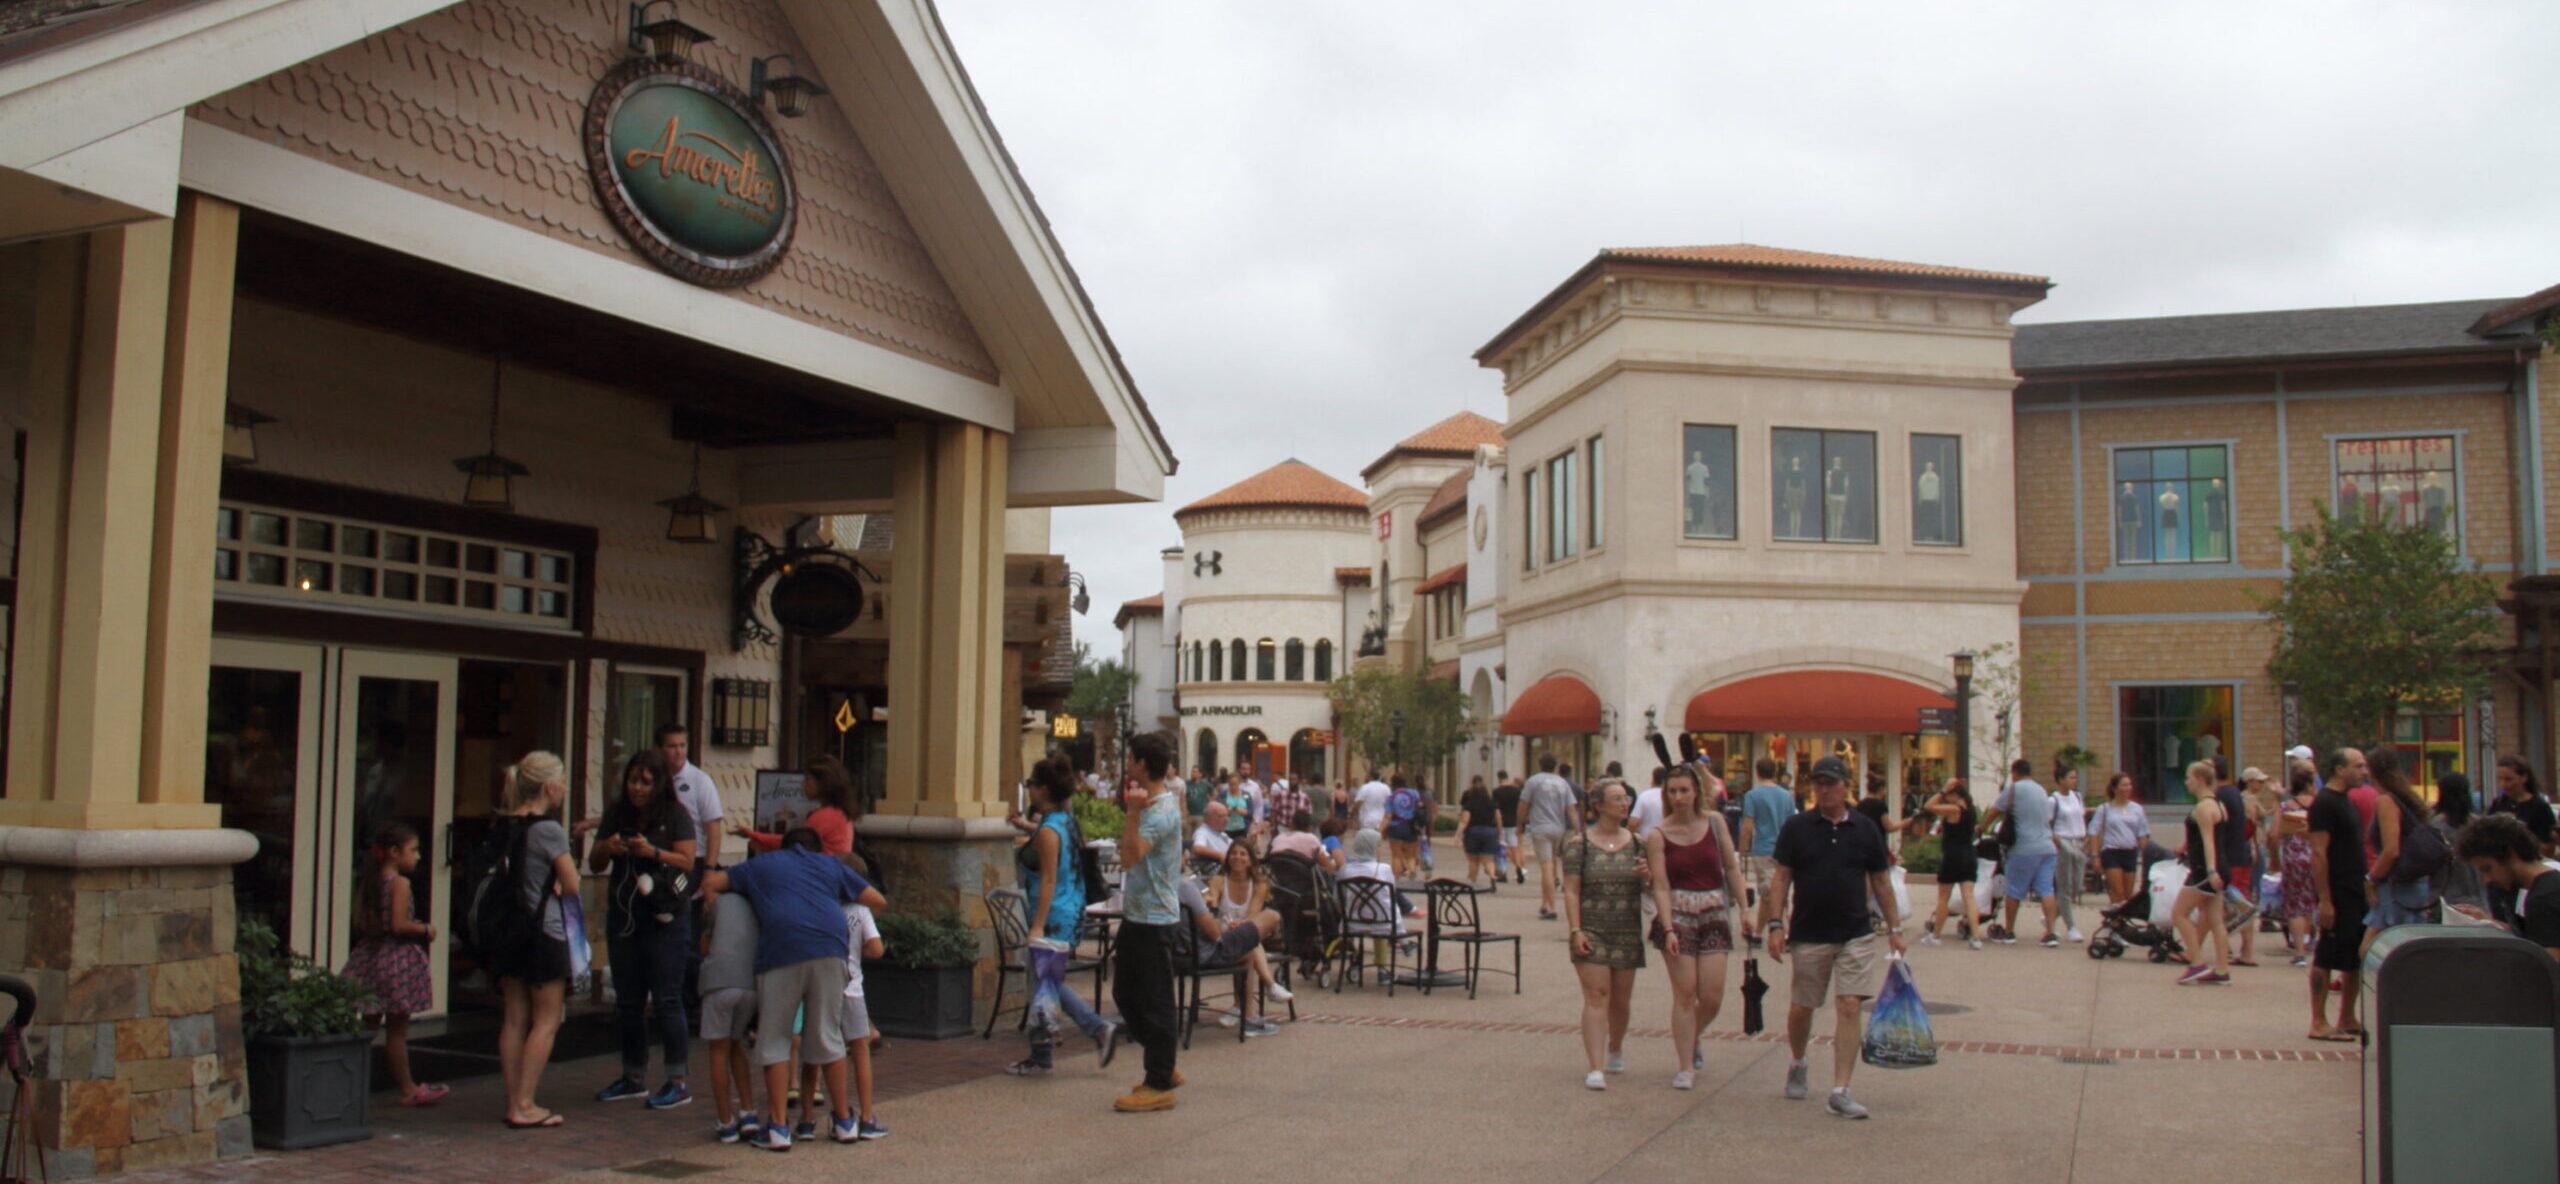 Man Arrested For Stealing Personal Possessions At Disney Springs